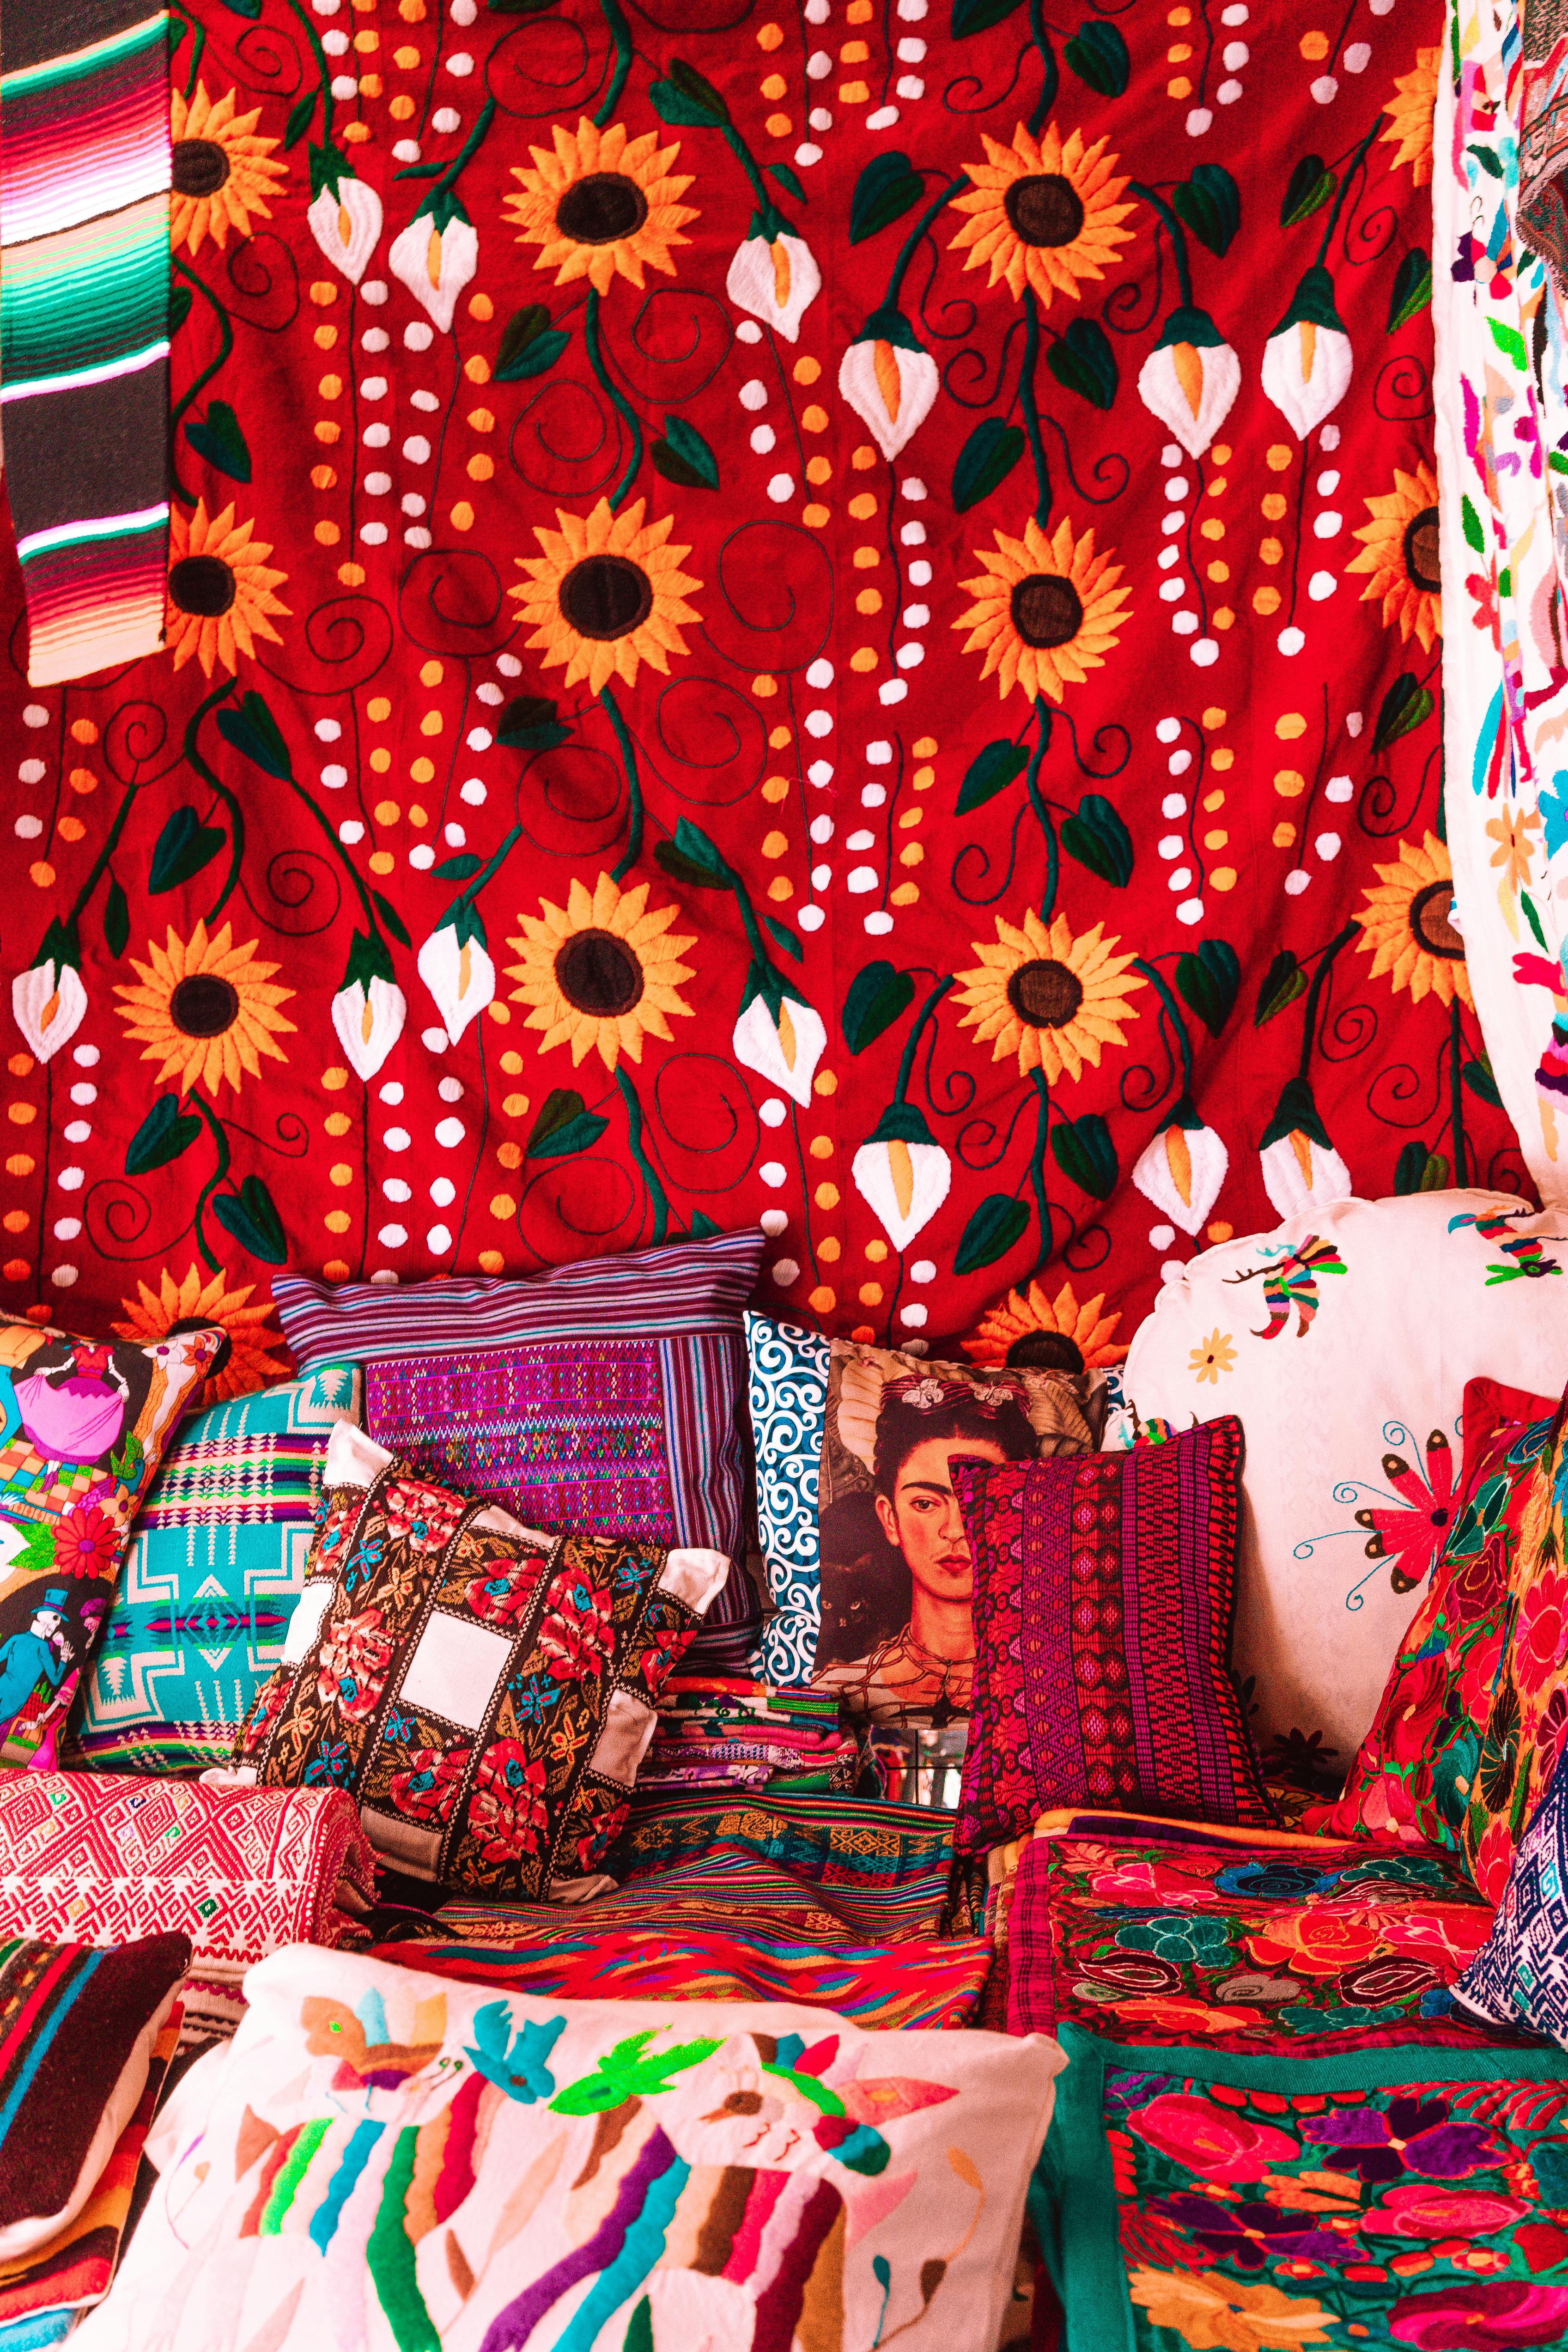 Red and White Floral Sofa \u00b7 Free Stock Photo